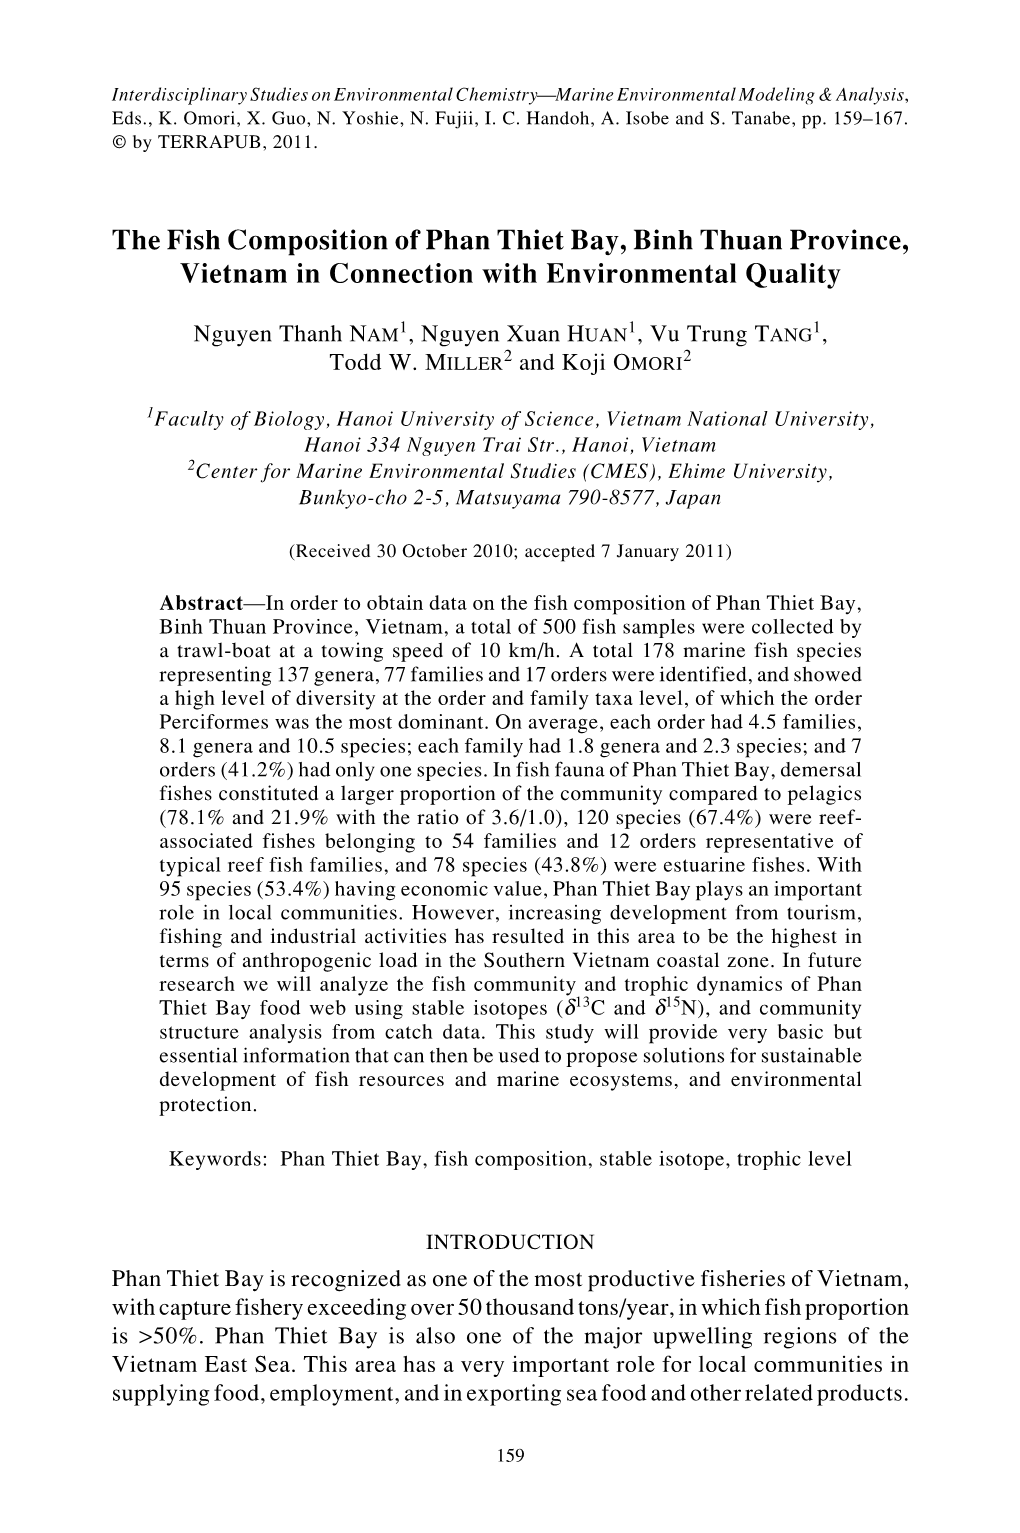 The Fish Composition of Phan Thiet Bay, Binh Thuan Province, Vietnam in Connection with Environmental Quality